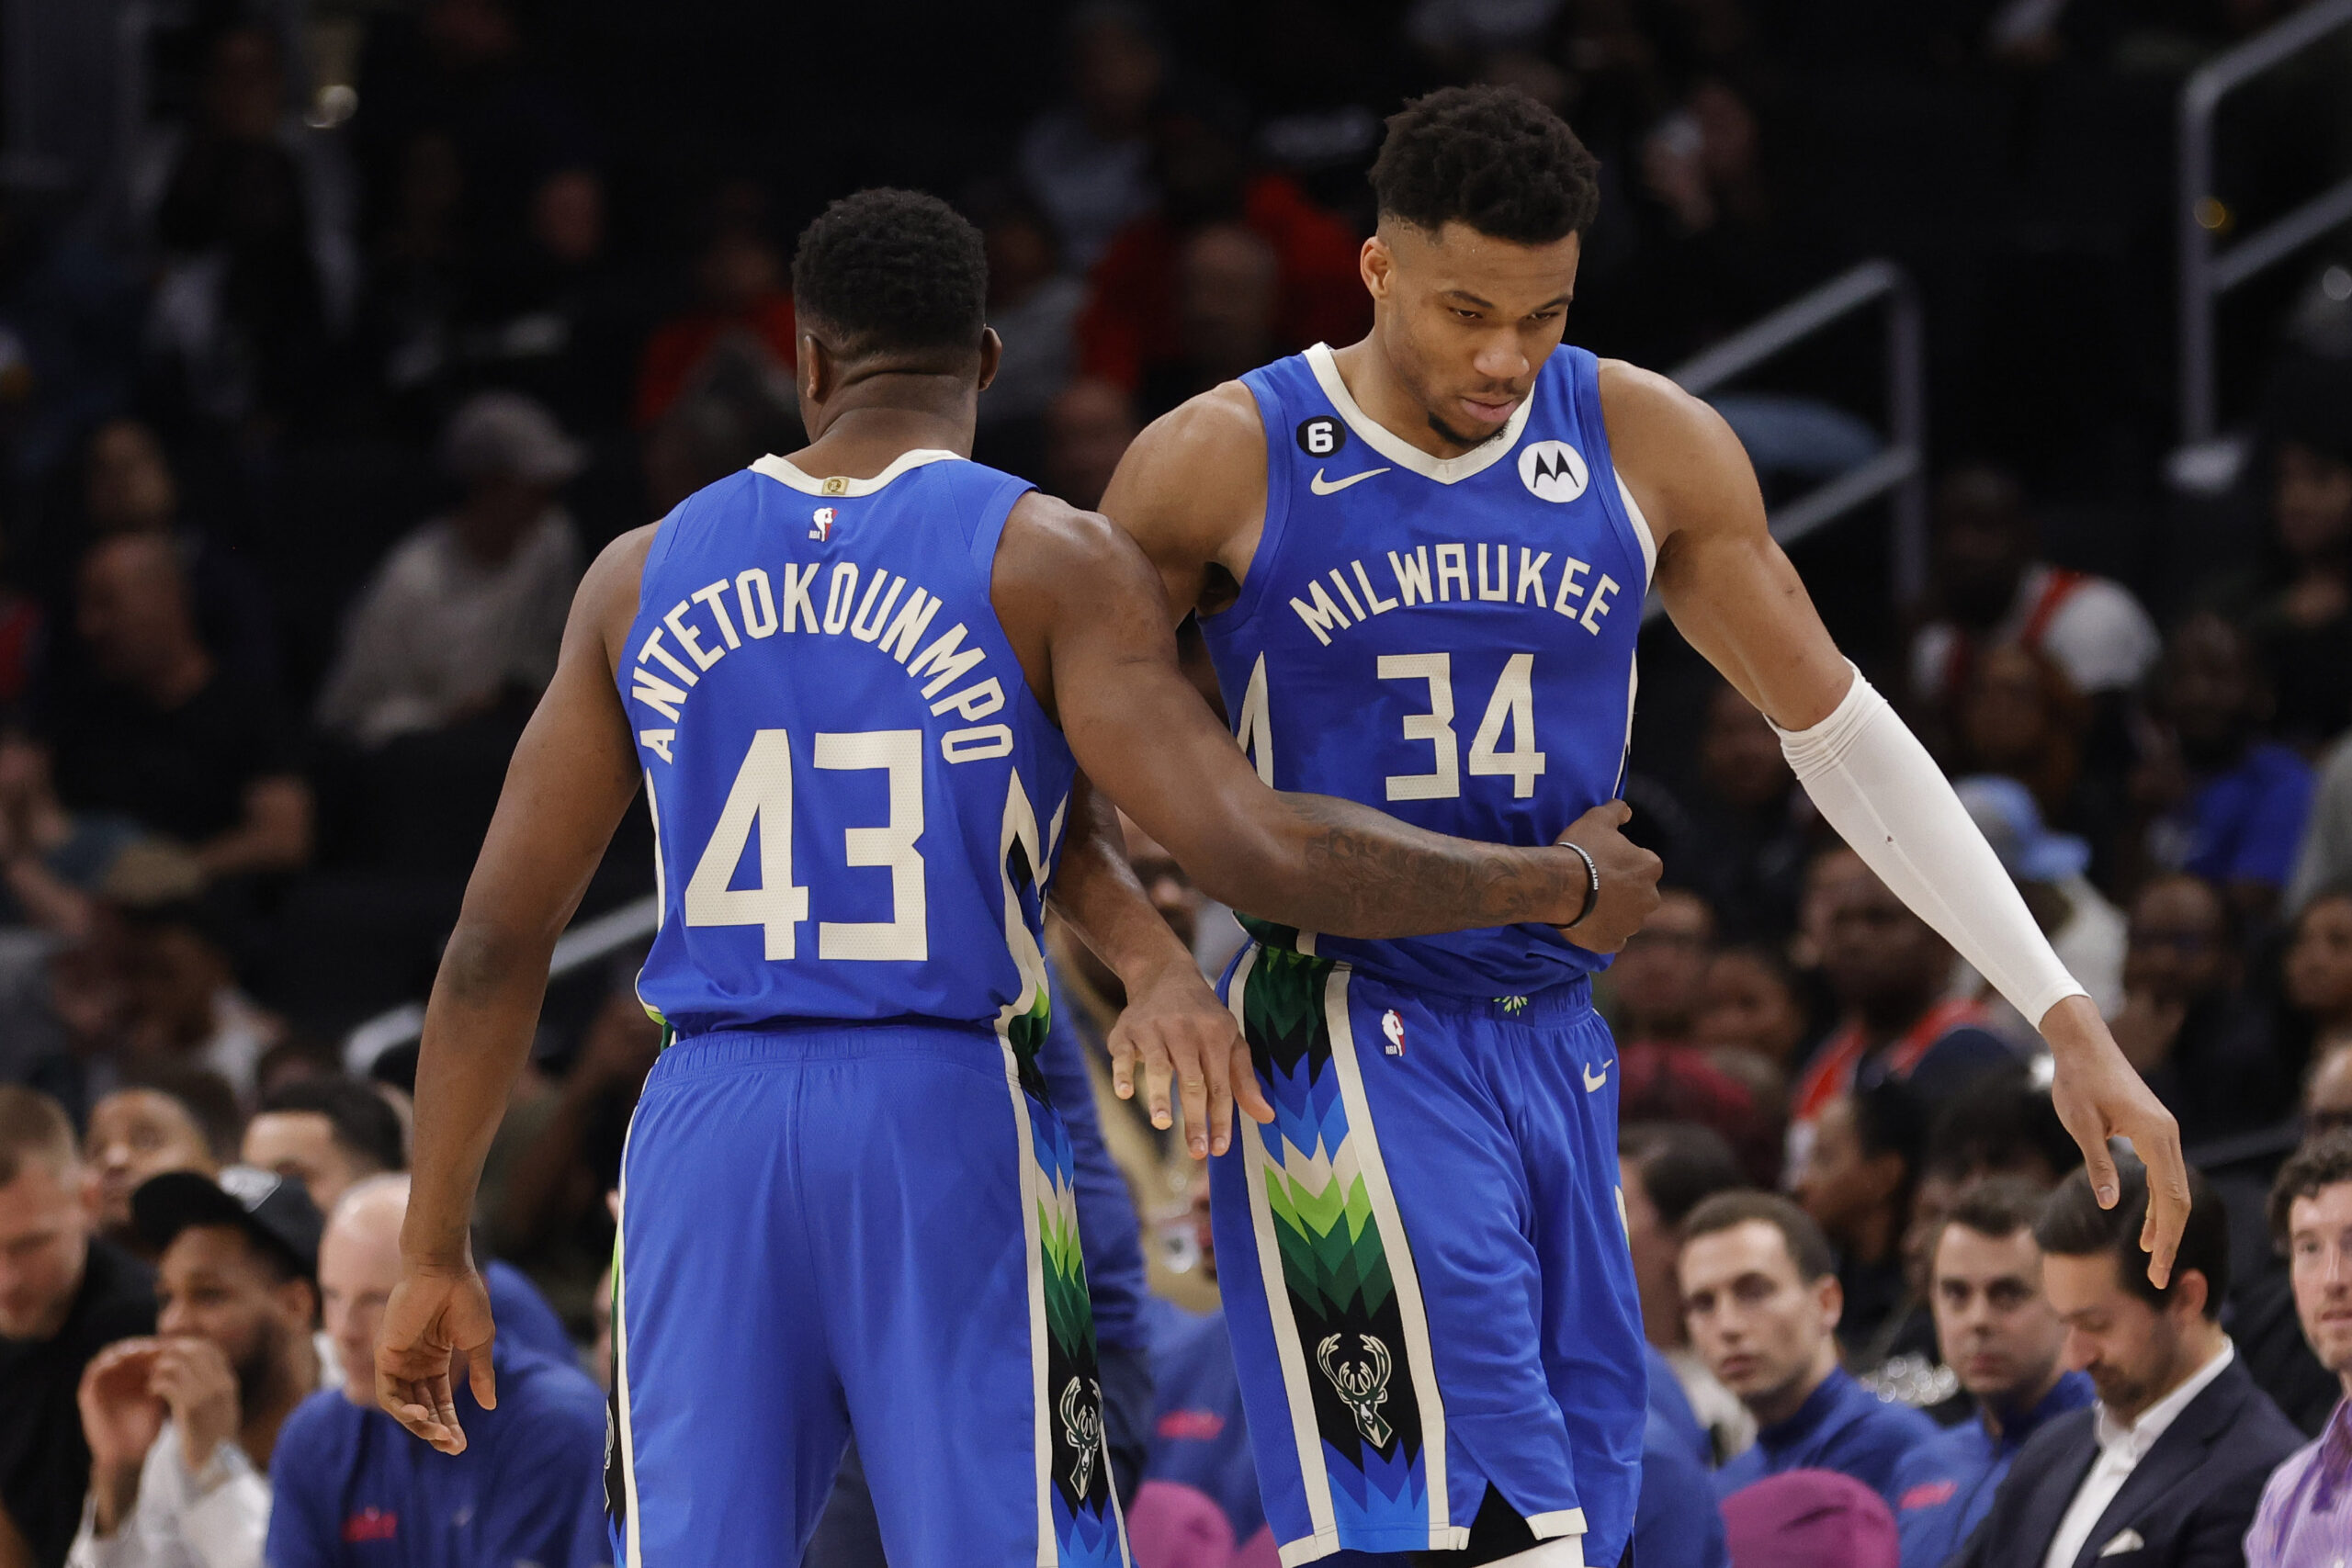 Apr 4, 2023; Washington, District of Columbia, USA; Milwaukee Bucks forward Giannis Antetokounmpo (34) hugs his brother, Bucks forward Thanasis Antetokounmpo (43), while walking off the floor against the Washington Wizards in the fourth quarter at Capital One Arena. Mandatory Credit: Geoff Burke-USA TODAY Sports